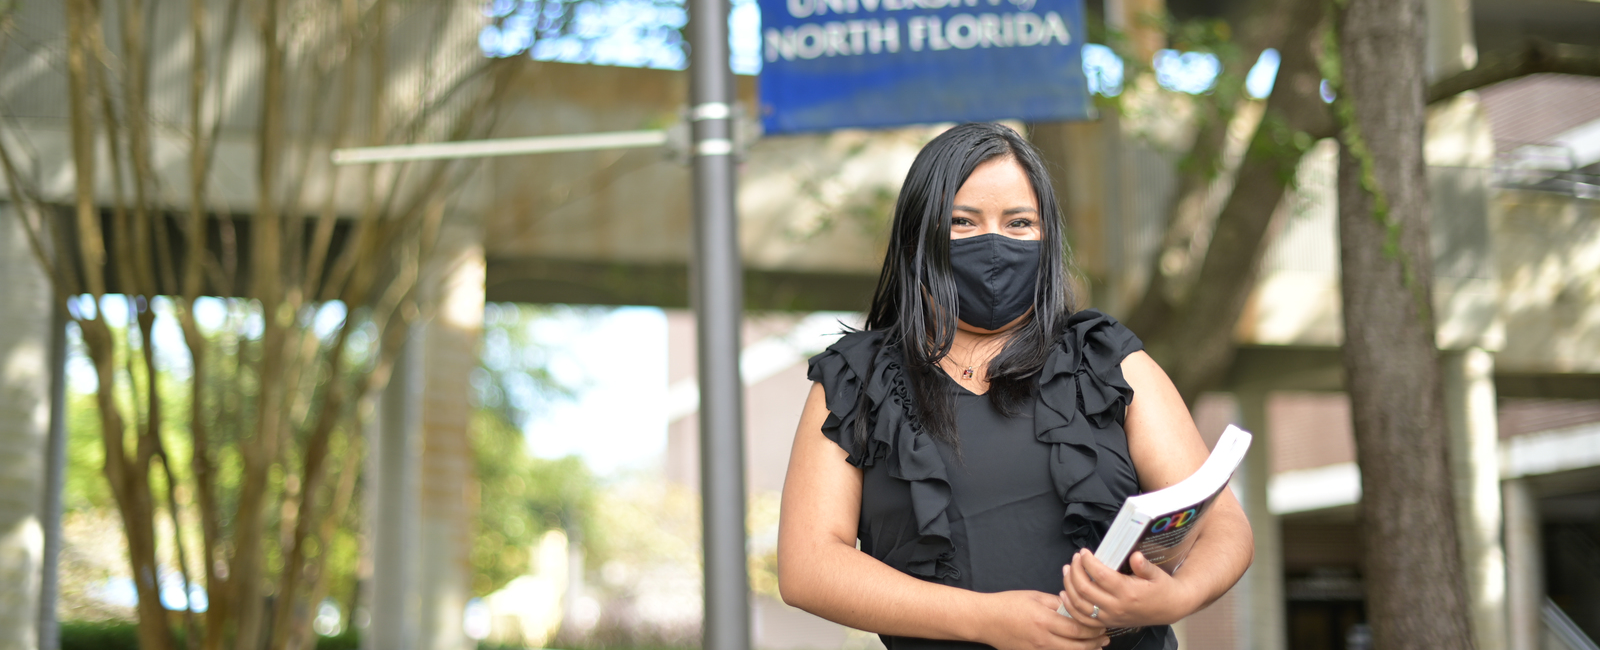 Female student holding books and wearing a face mask while standing outside on campus